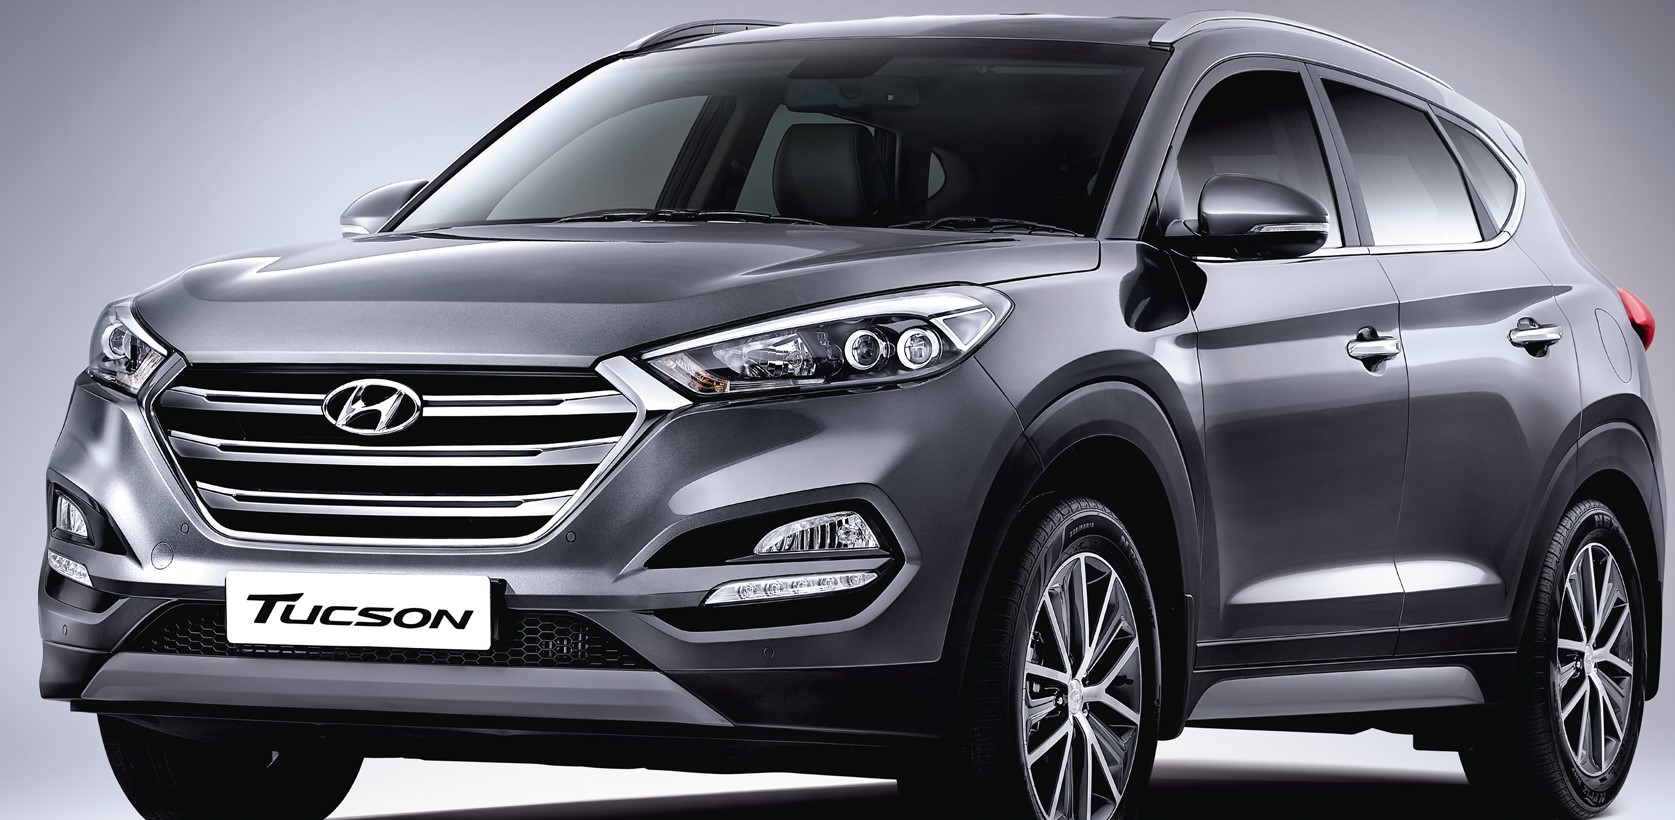 New Hyundai Tucson Launched in India at INR 18.99 lakh